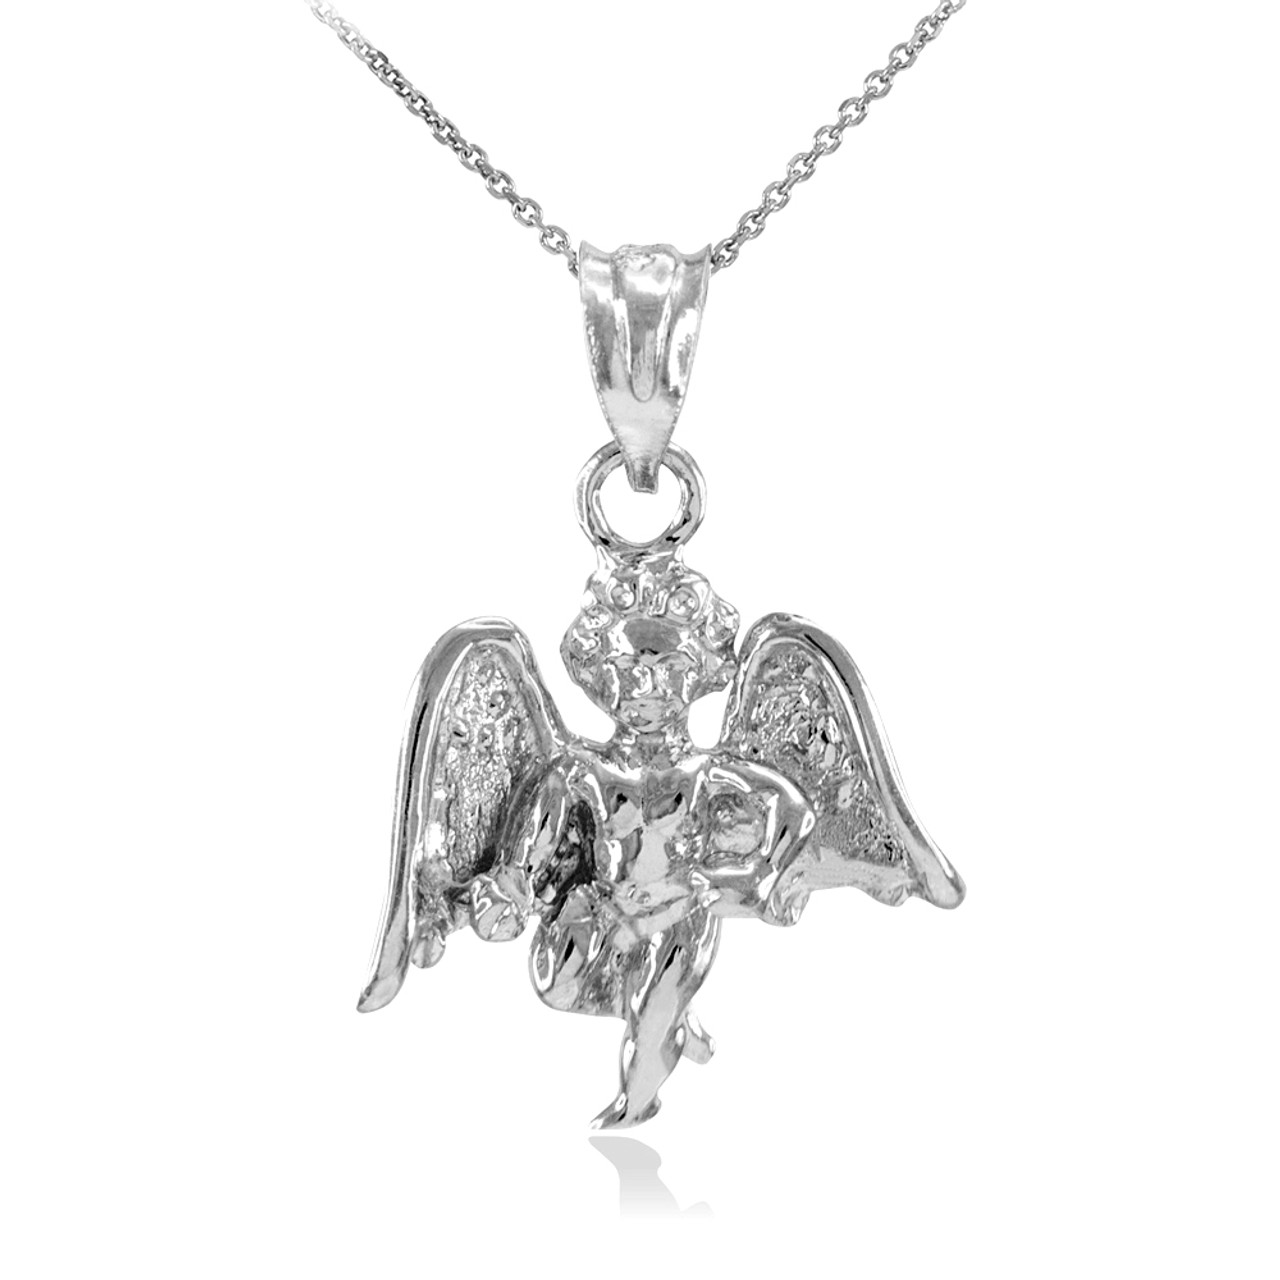 Solid 925 Sterling Silver Angel Pendant 